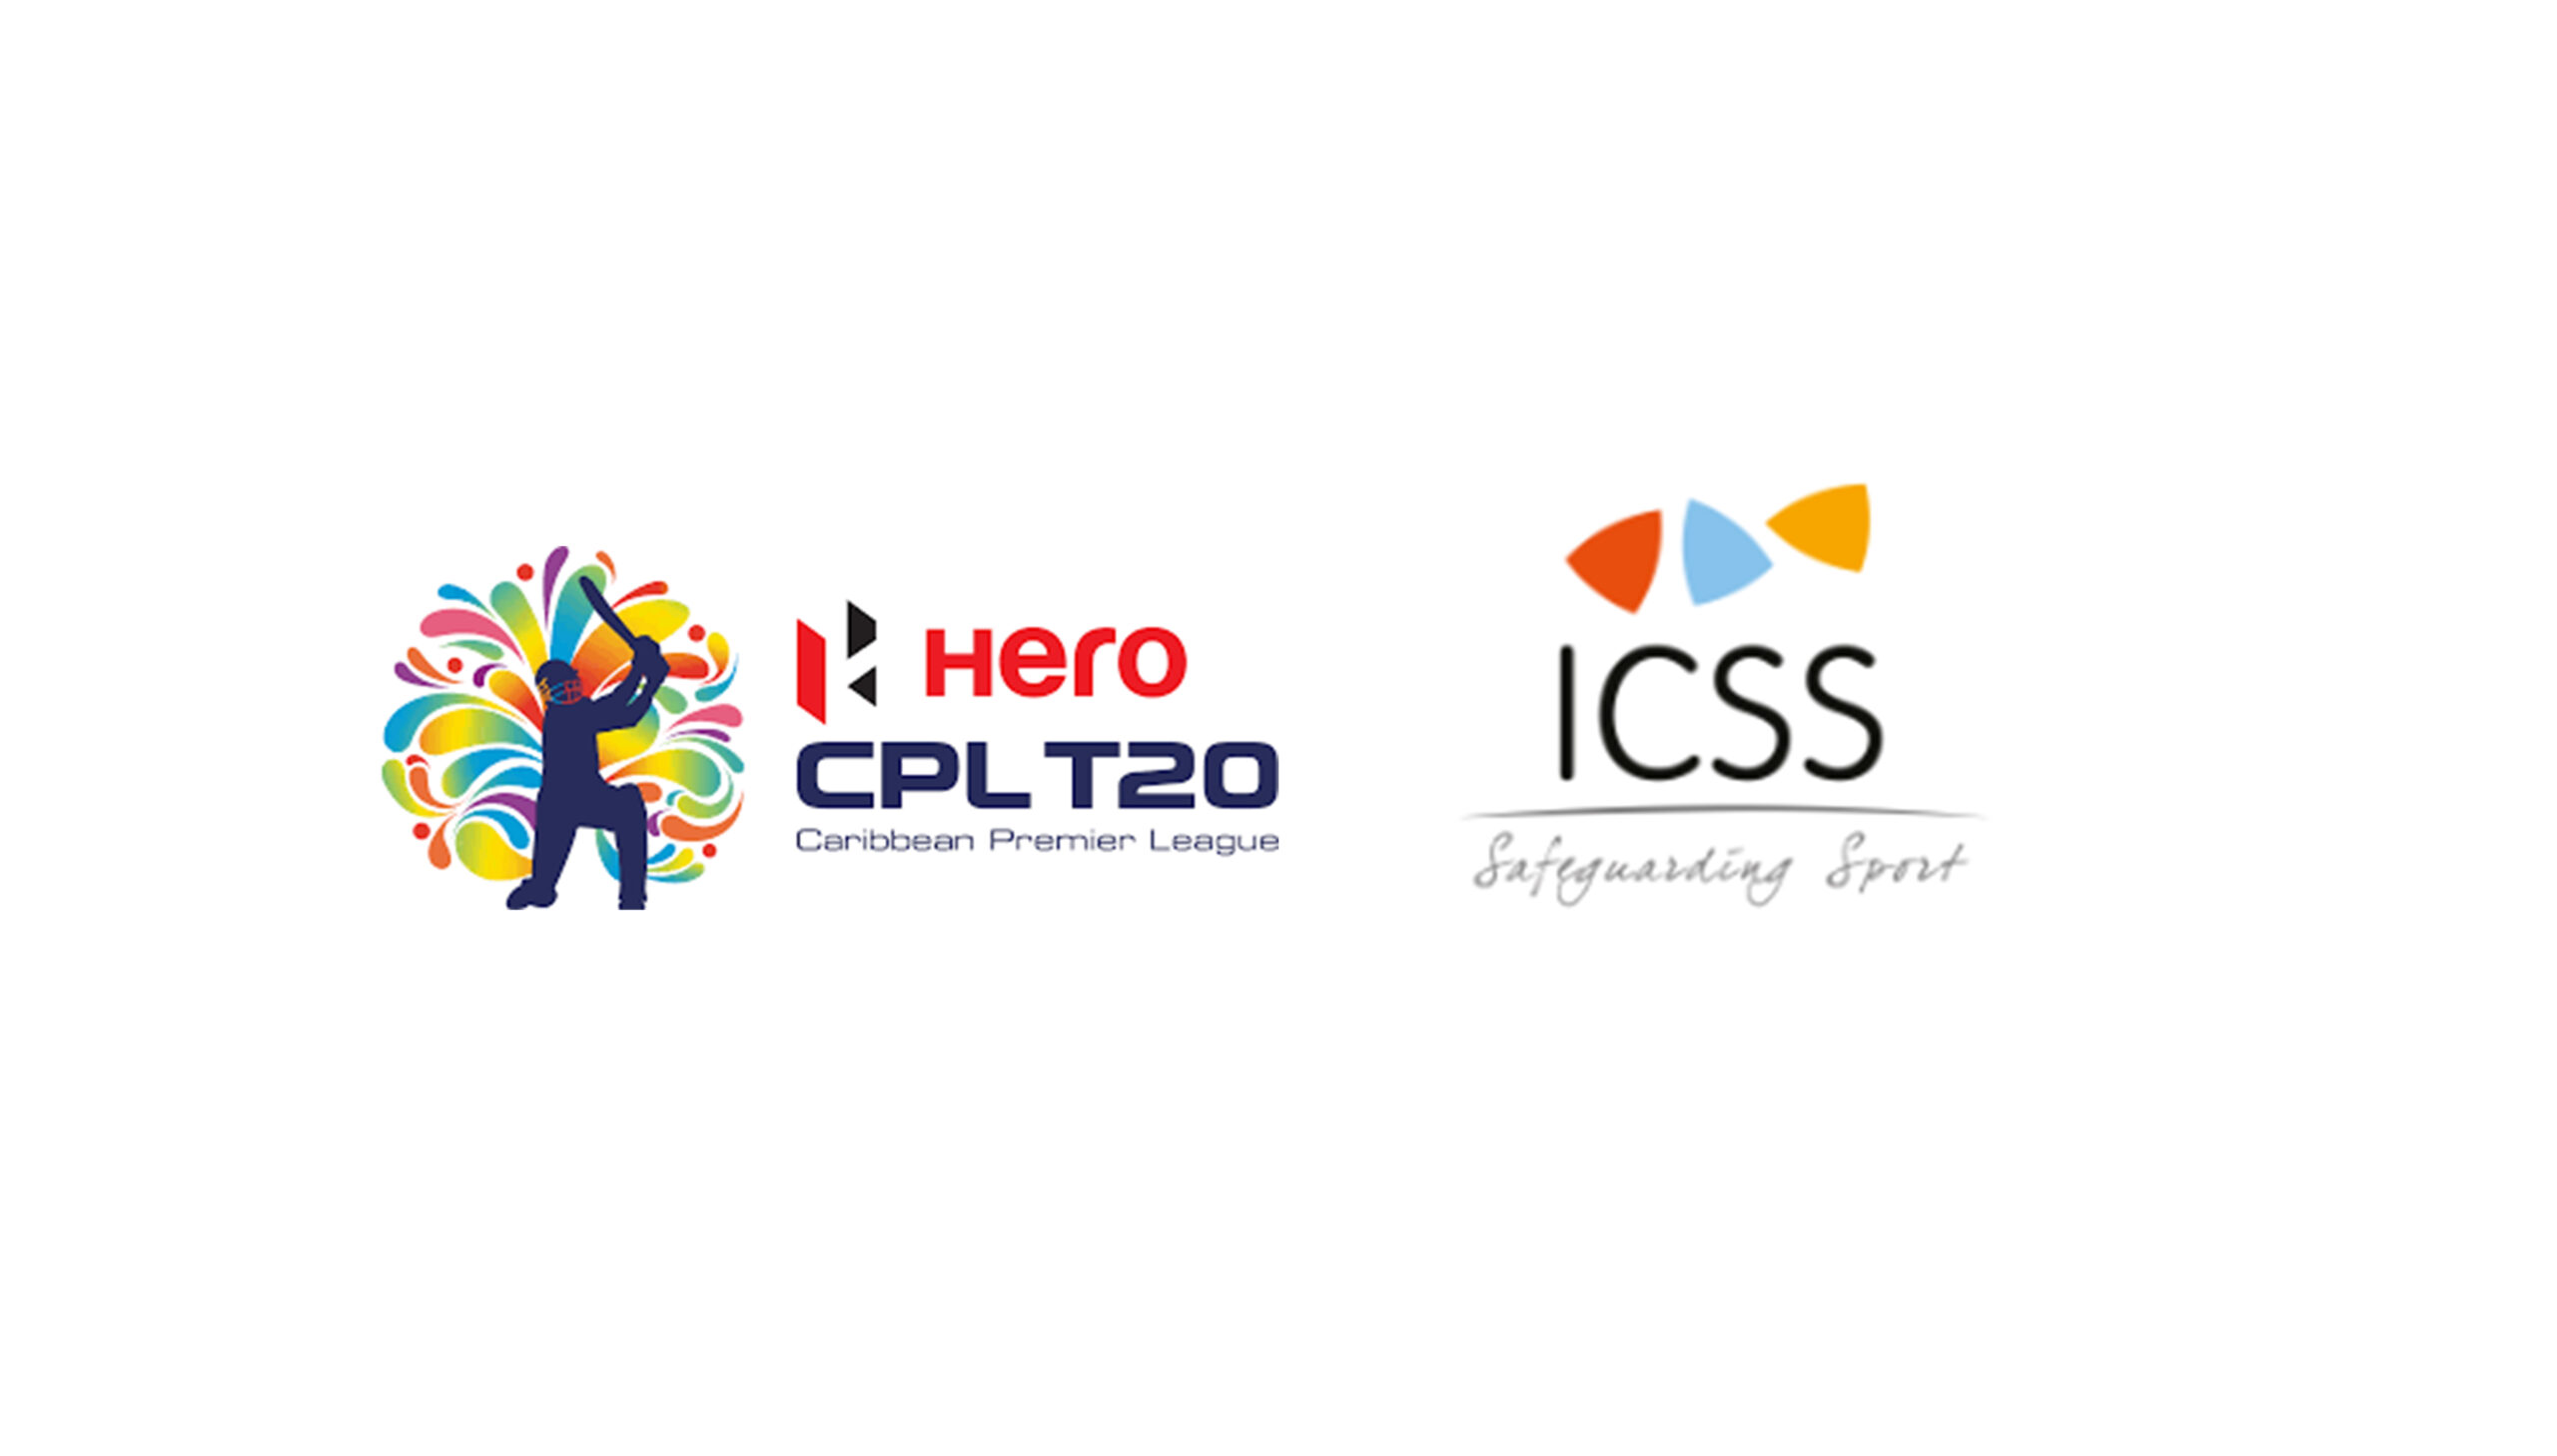 ICSS » Hero Caribbean Premier League calls on ICSS to support competition oversight